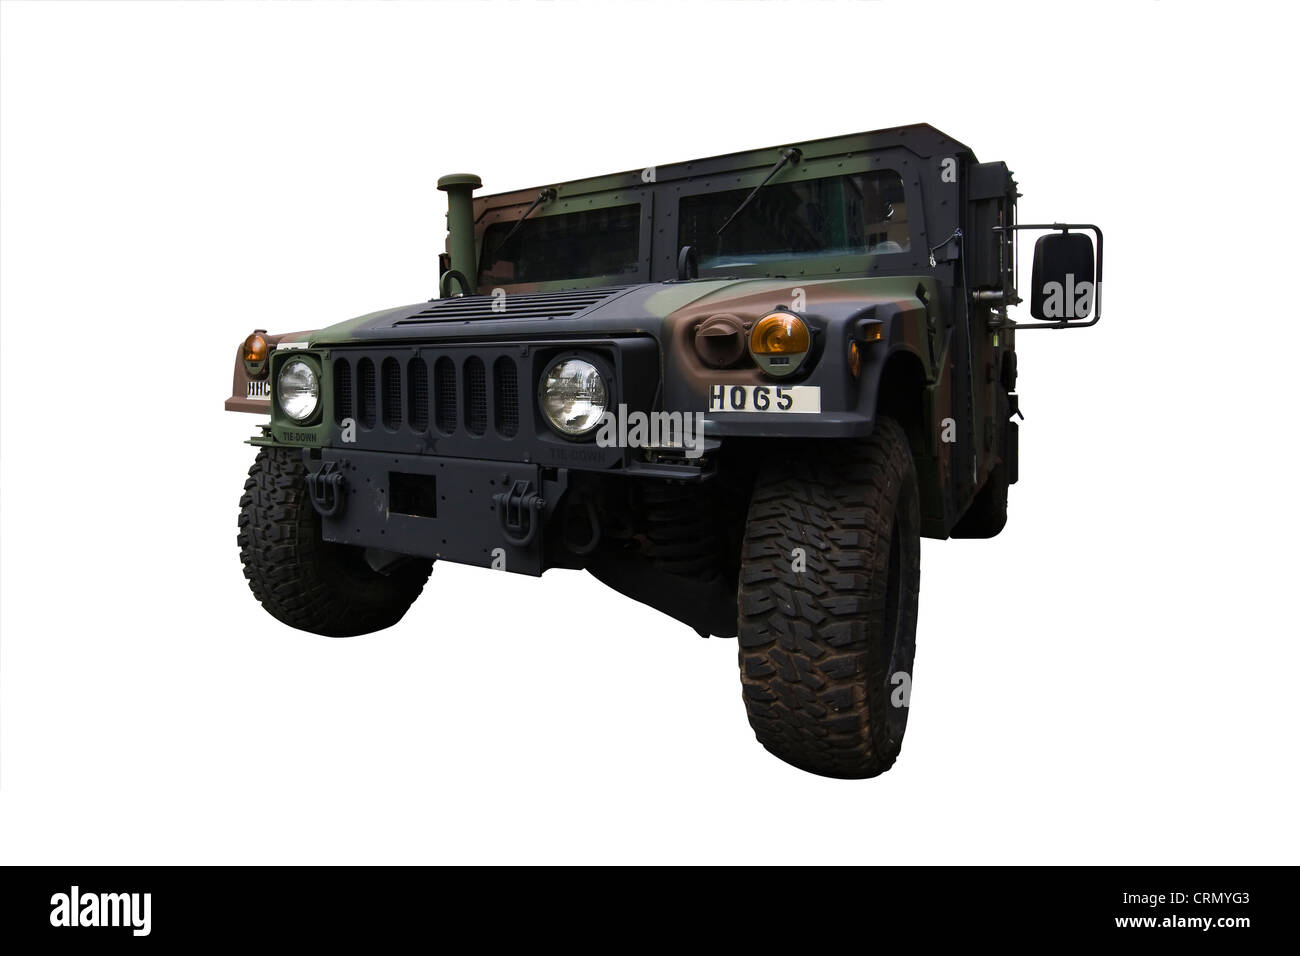 Cut Out. High Mobility Multipurpose Wheeled Vehicle (HMMWV or Humvee). A US Military 4WD vehicle created by AM General. Stock Photo